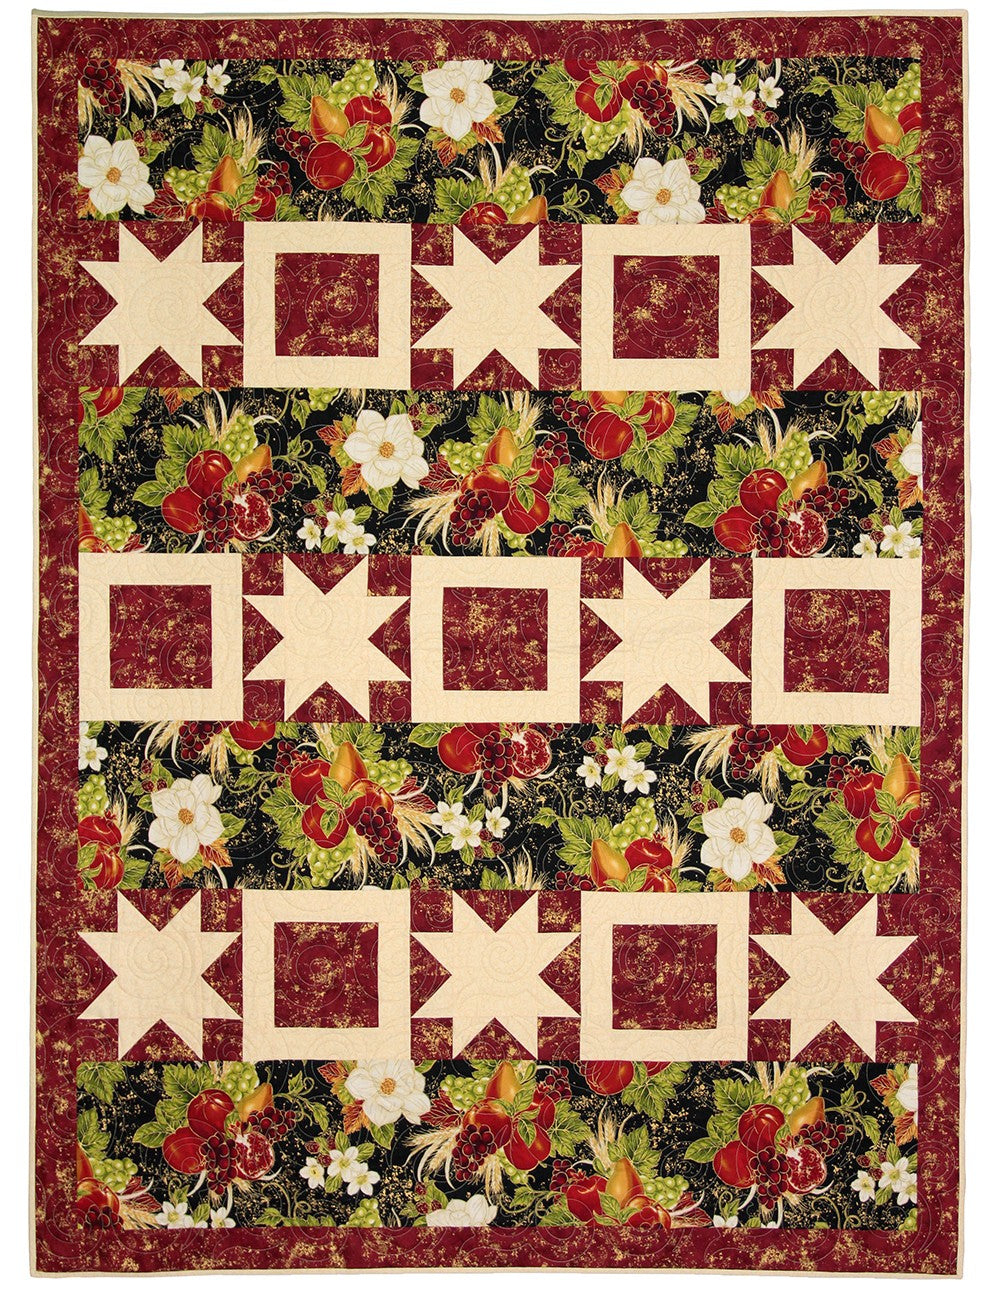 The Magic of 3-Yard Quilts